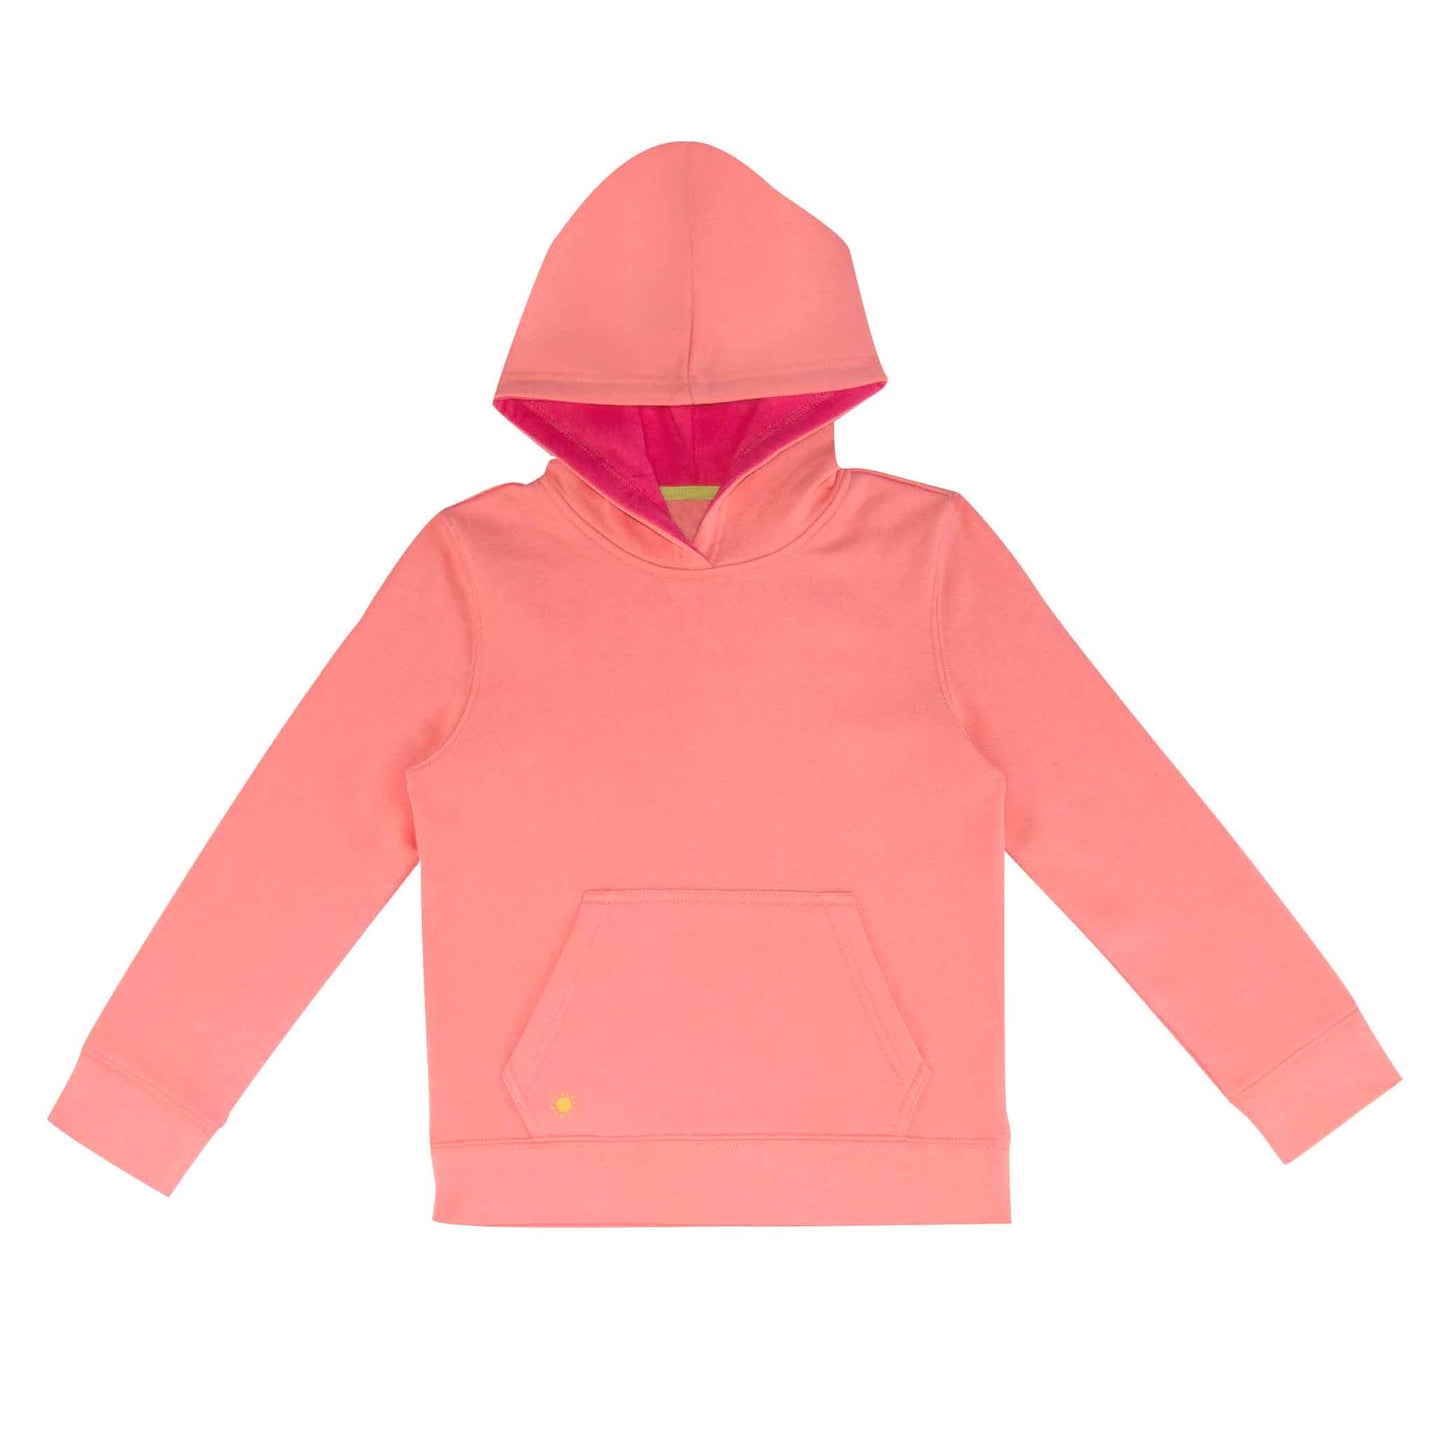 Fleece Pullover Hoodie with Embroidered hearts on sleeve